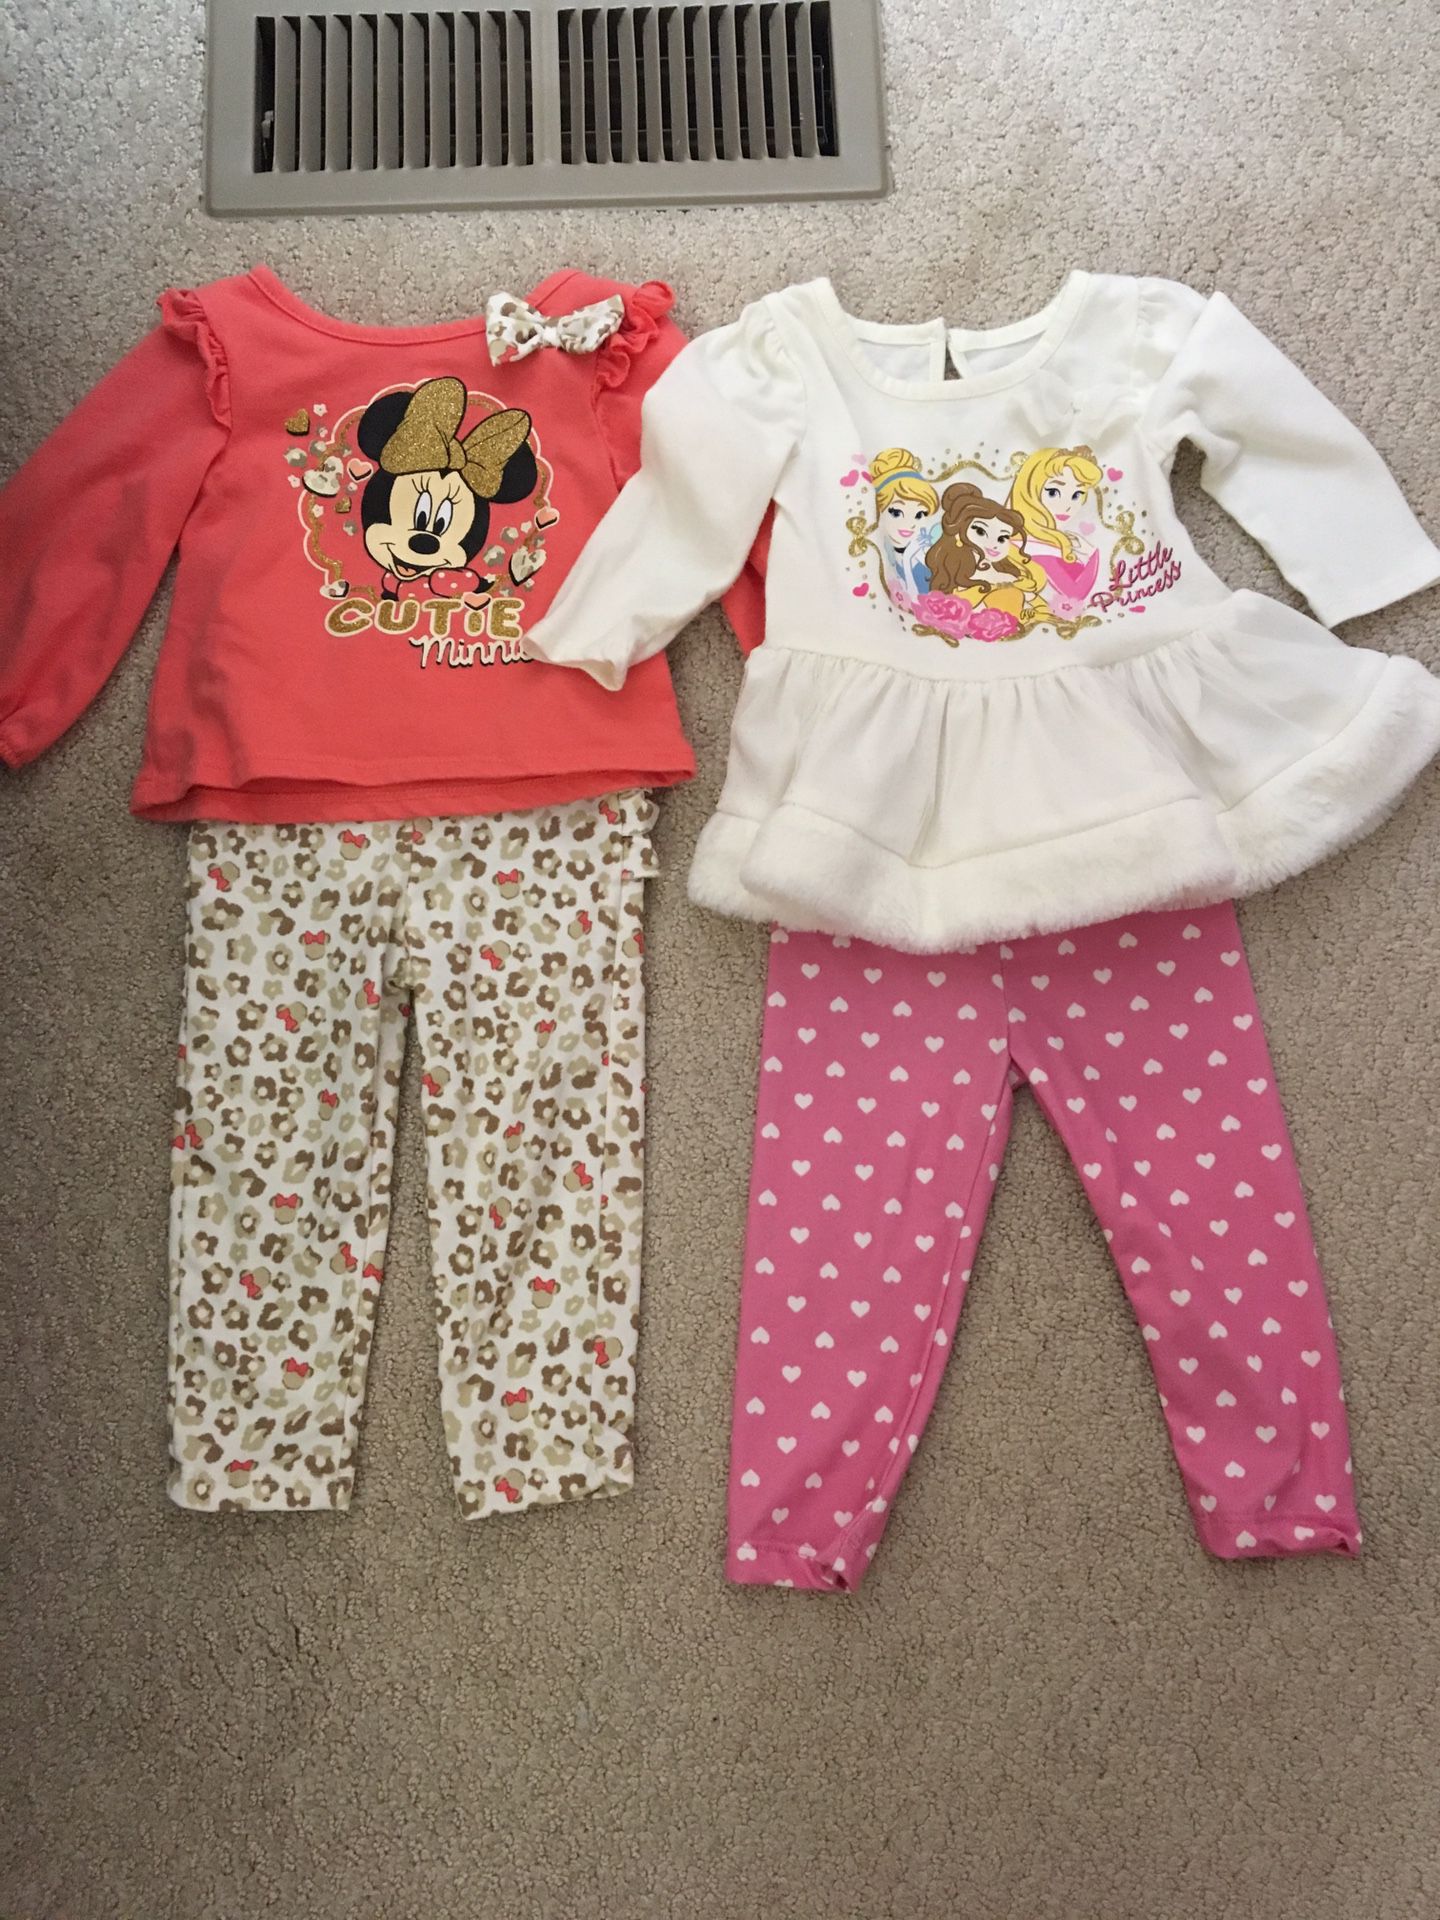 12 month old clothes